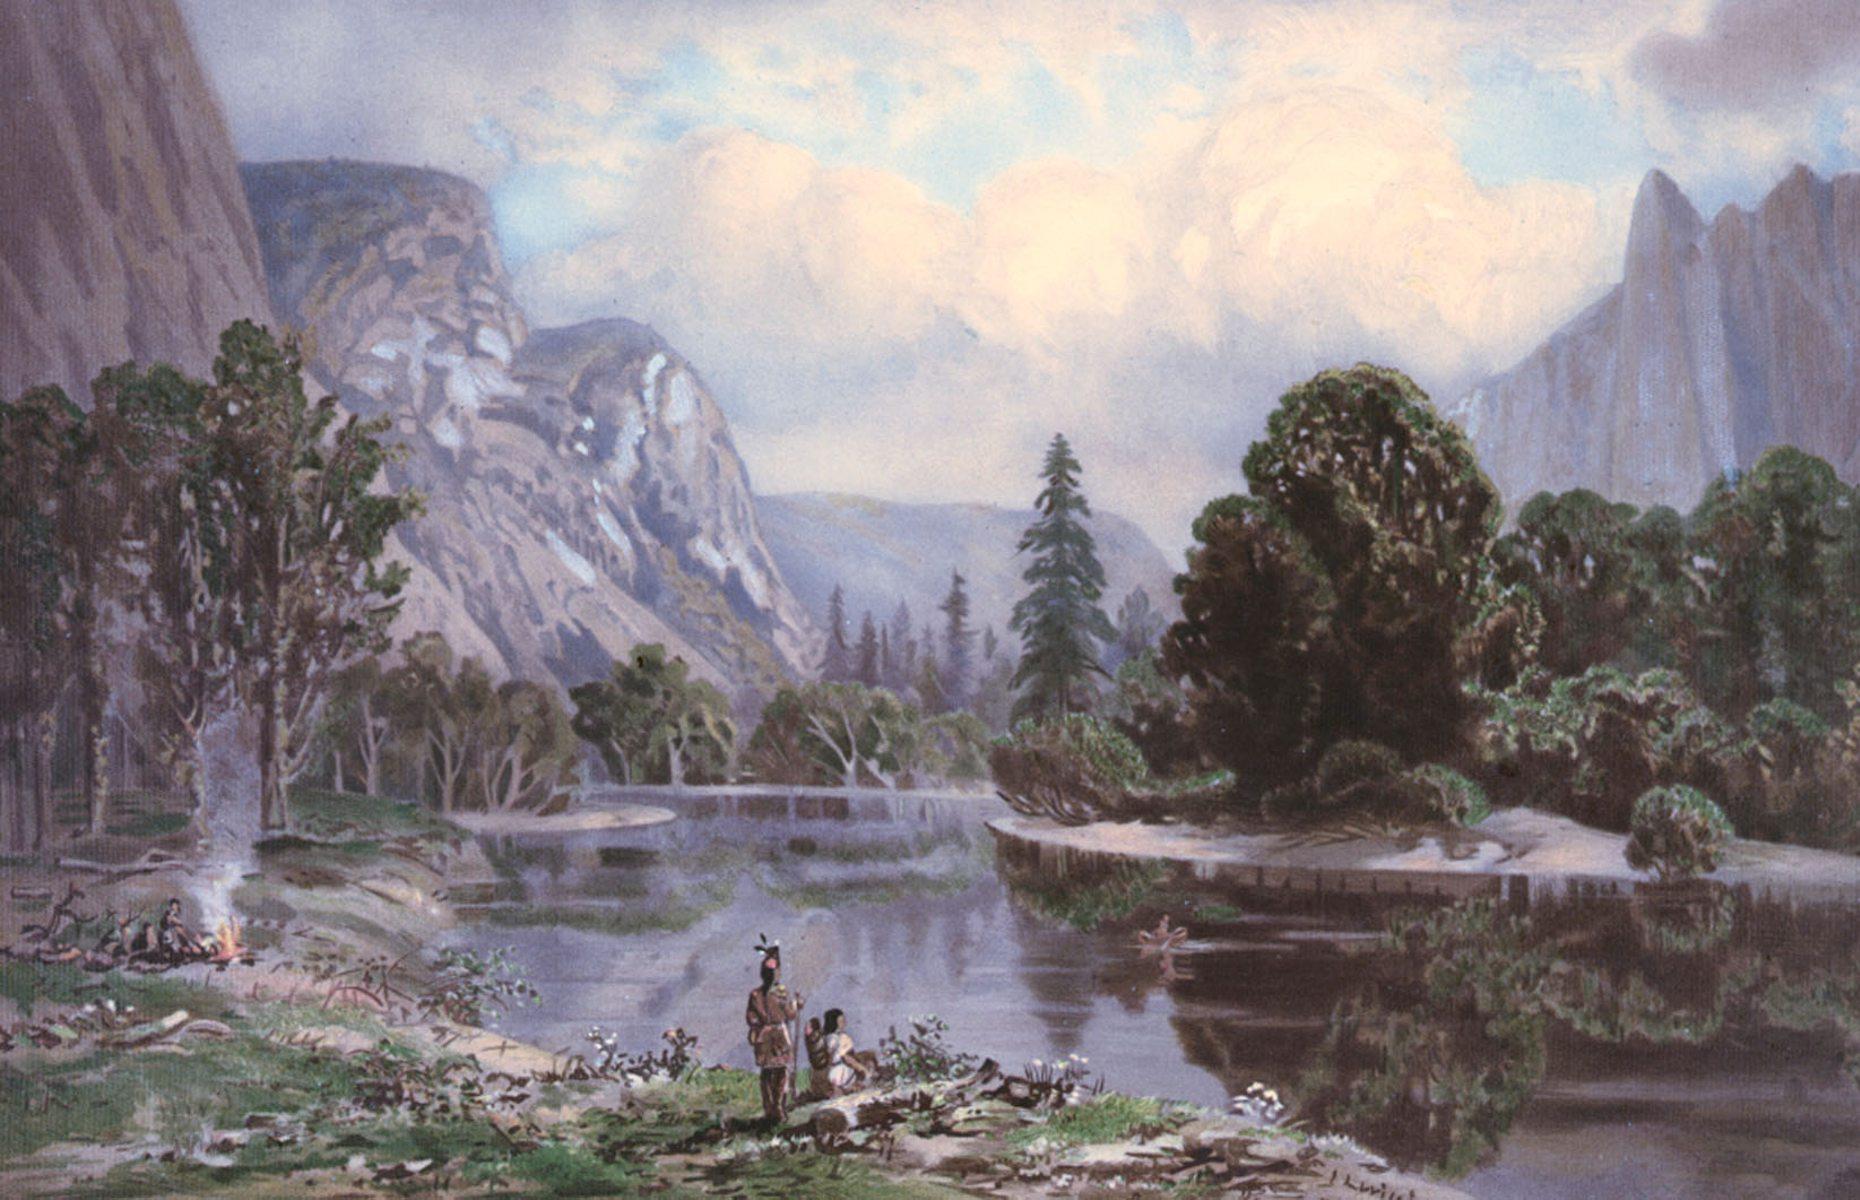 <p>Archaeological studies of the Yosemite Valley show that Native Americans have lived in this part of modern-day California for around 5,500 years. The peoples of the Southern Sierra Miwuk Nation were the main Indigenous inhabitants of what is now the national park, with Yosemite translating as “those who are killers” in the language of the Miwuk. This name refers to the Ahwahneechee, a mixed tribe including Miwuk and Mono Paiute peoples who resided in Yosemite Valley.</p>